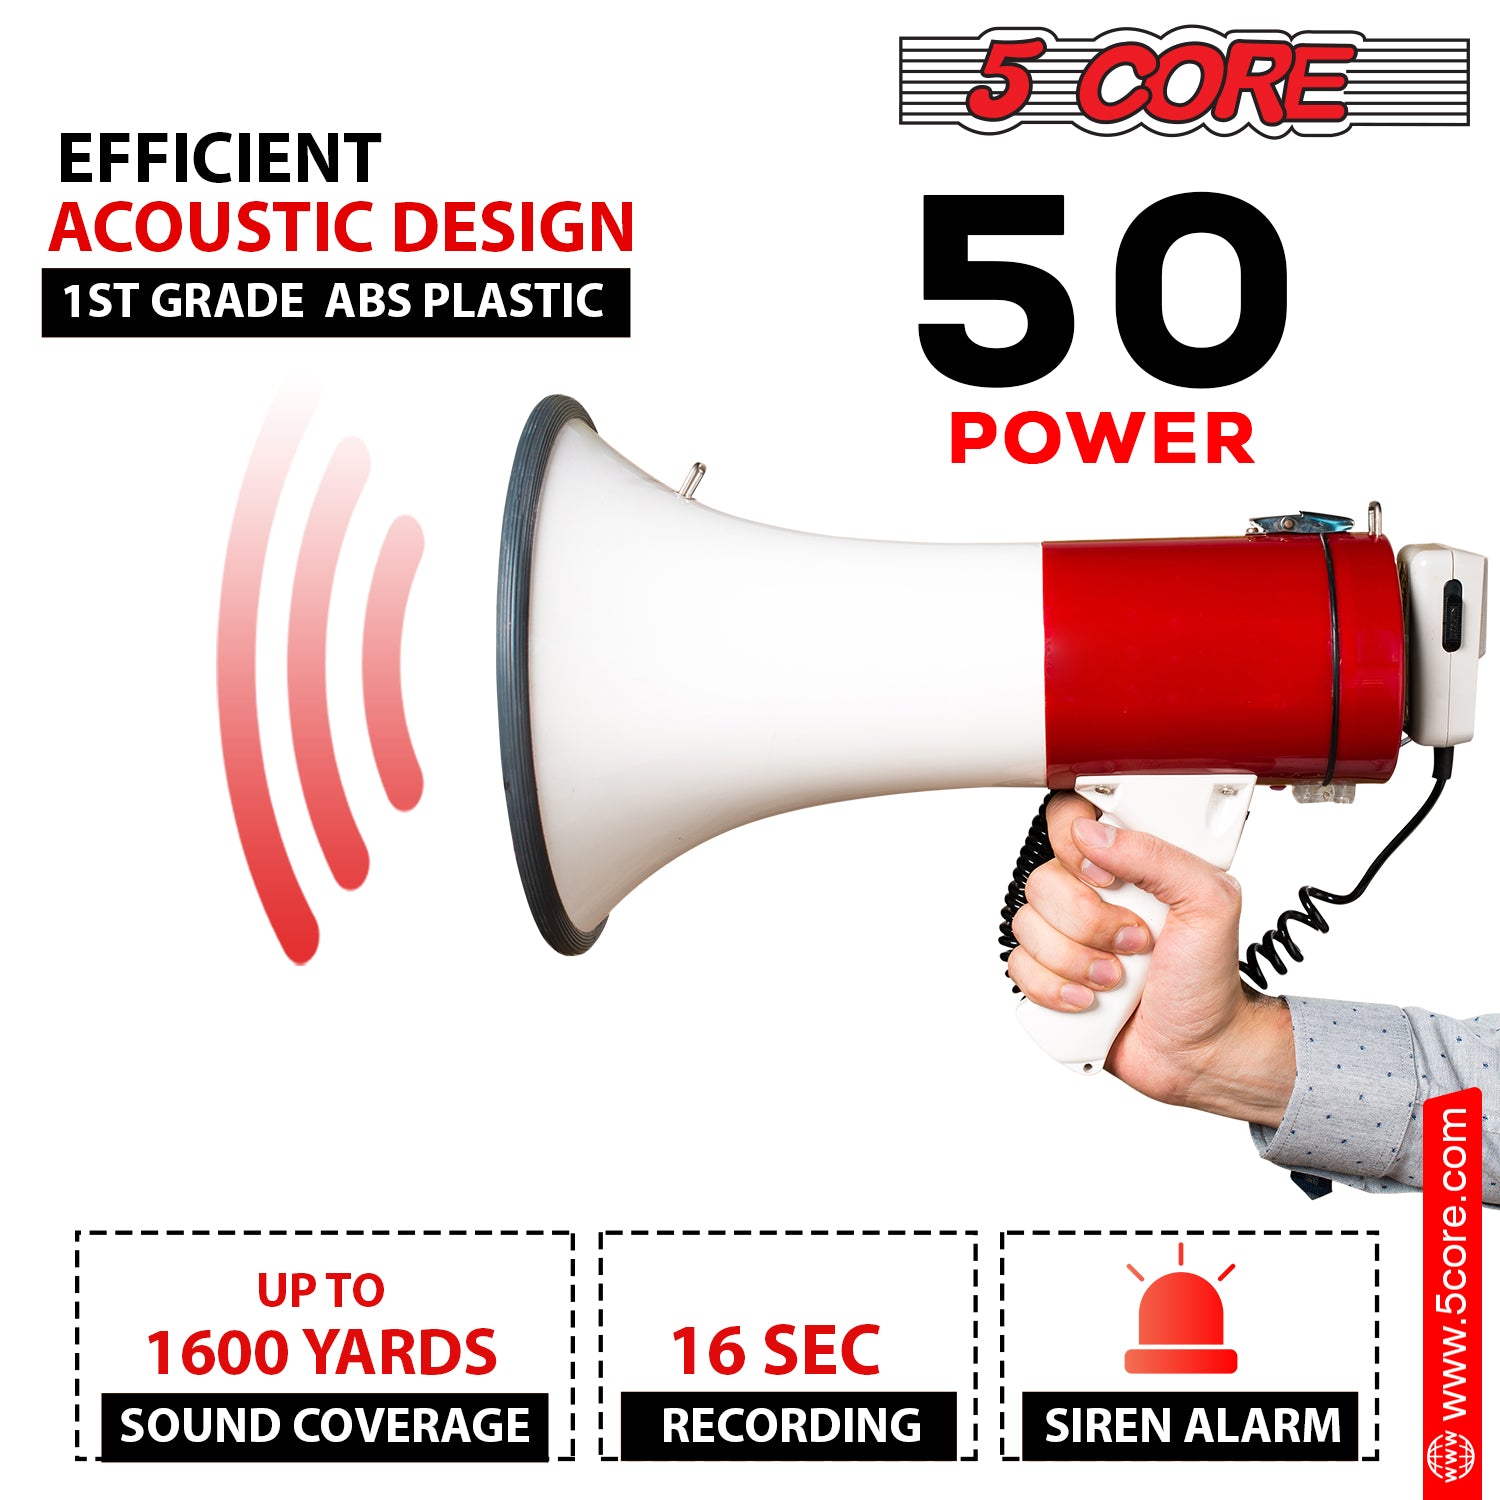 5 Core Megaphone Bull Horn 50W Rechargeable Loud Siren Noise Maker Professional Bullhorn Speaker PA System w Recording USB SD Card Adjustable Volume for Coaches Sport Speeches Emergencies Crowd Control -66SF